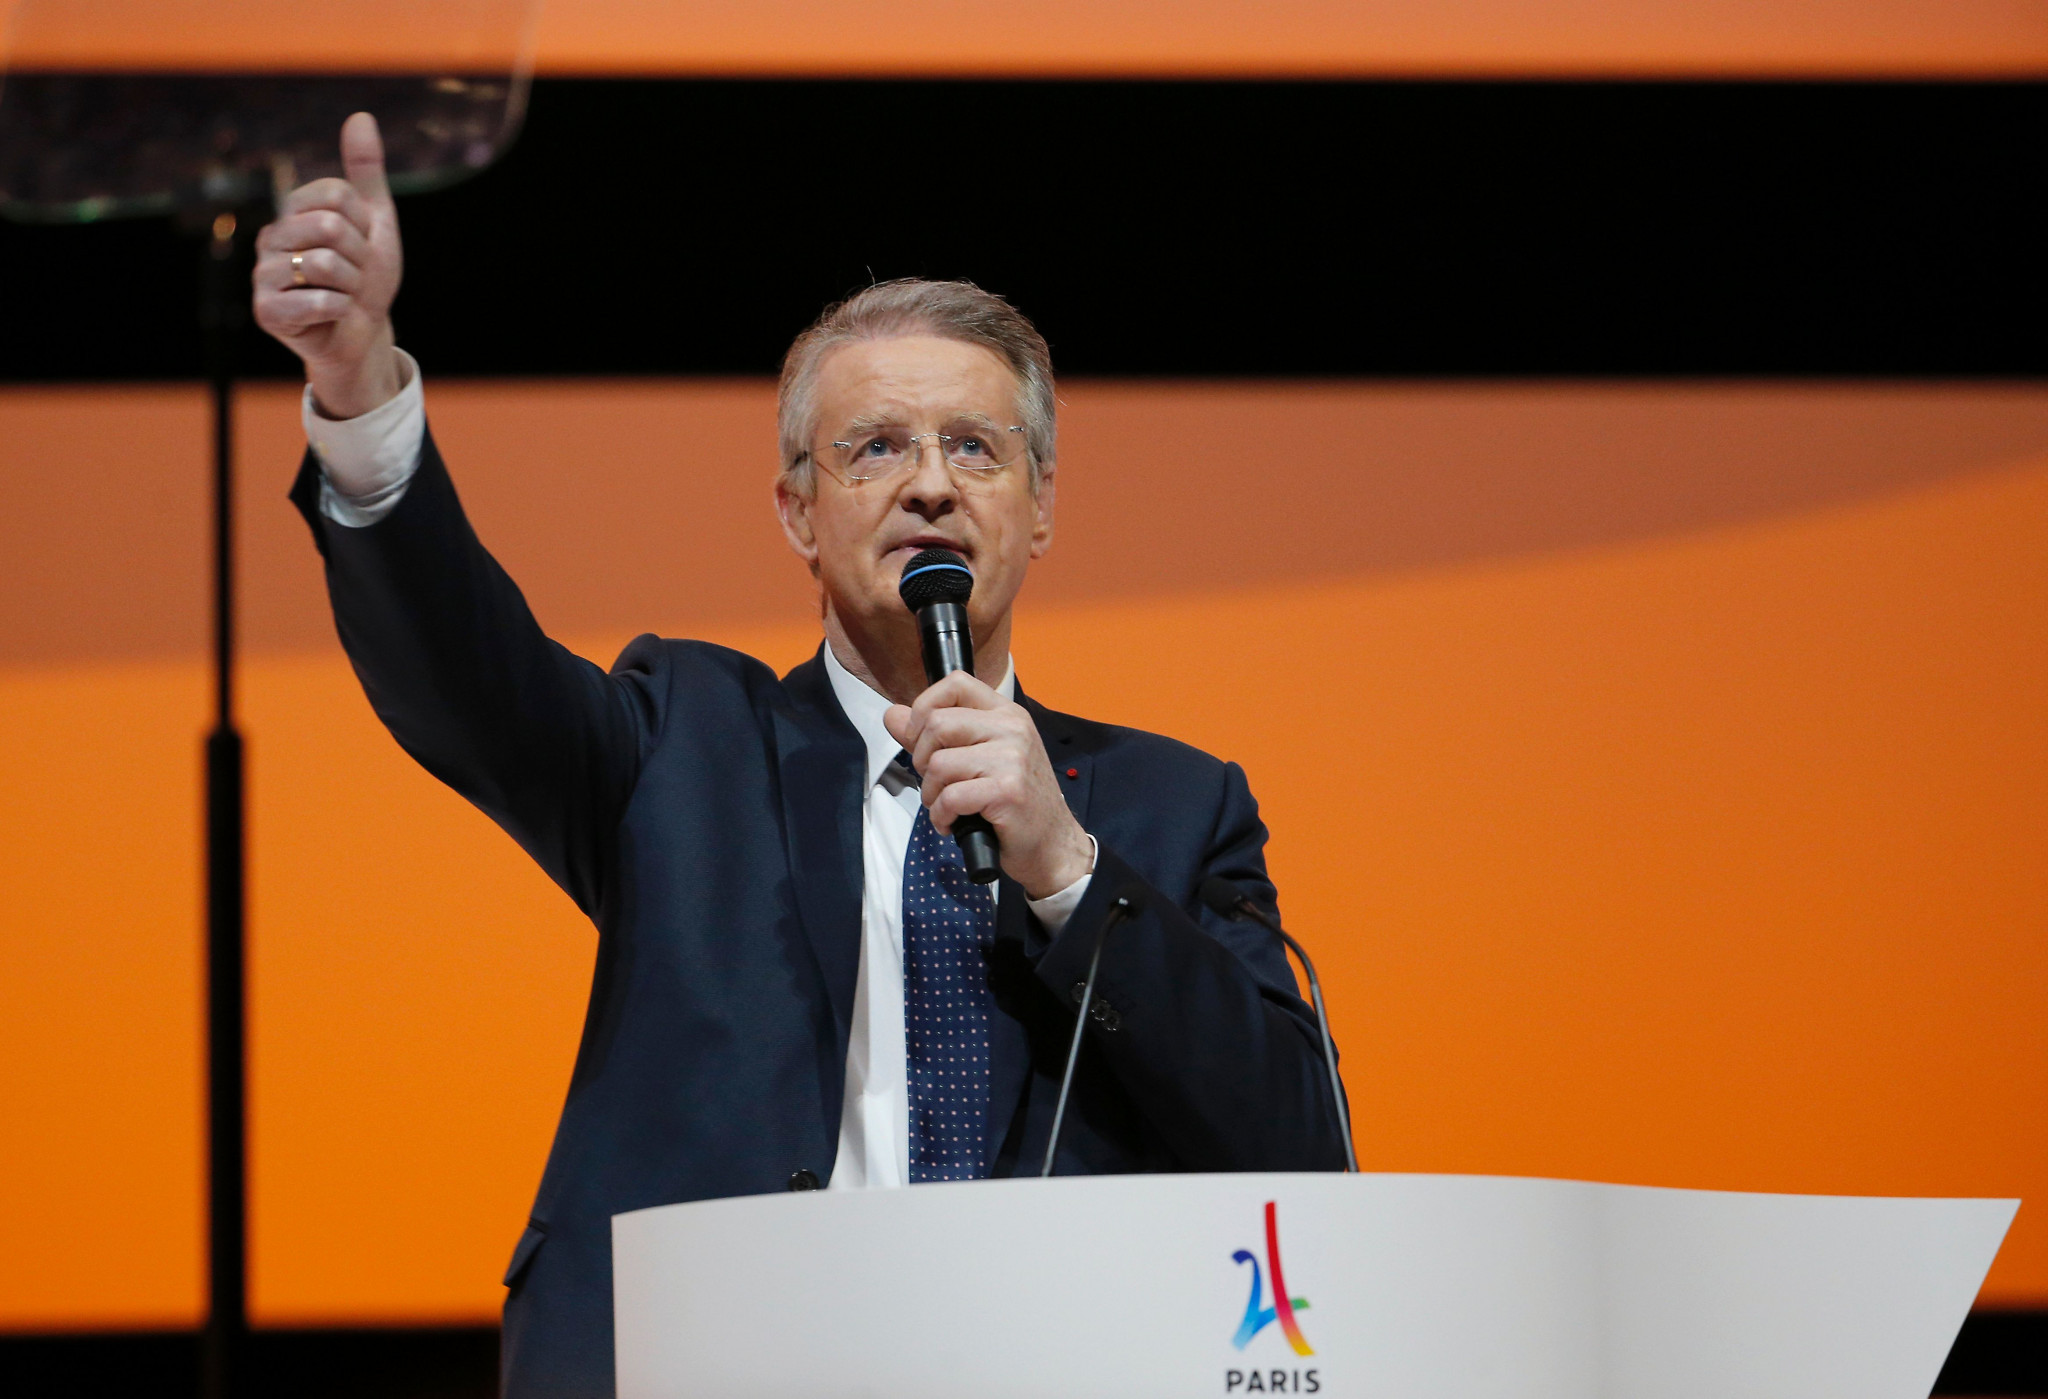 Bernard Lapasset was the co-president of Paris' successful bid for the 2024 Olympic and Paralympic Games ©Getty Images